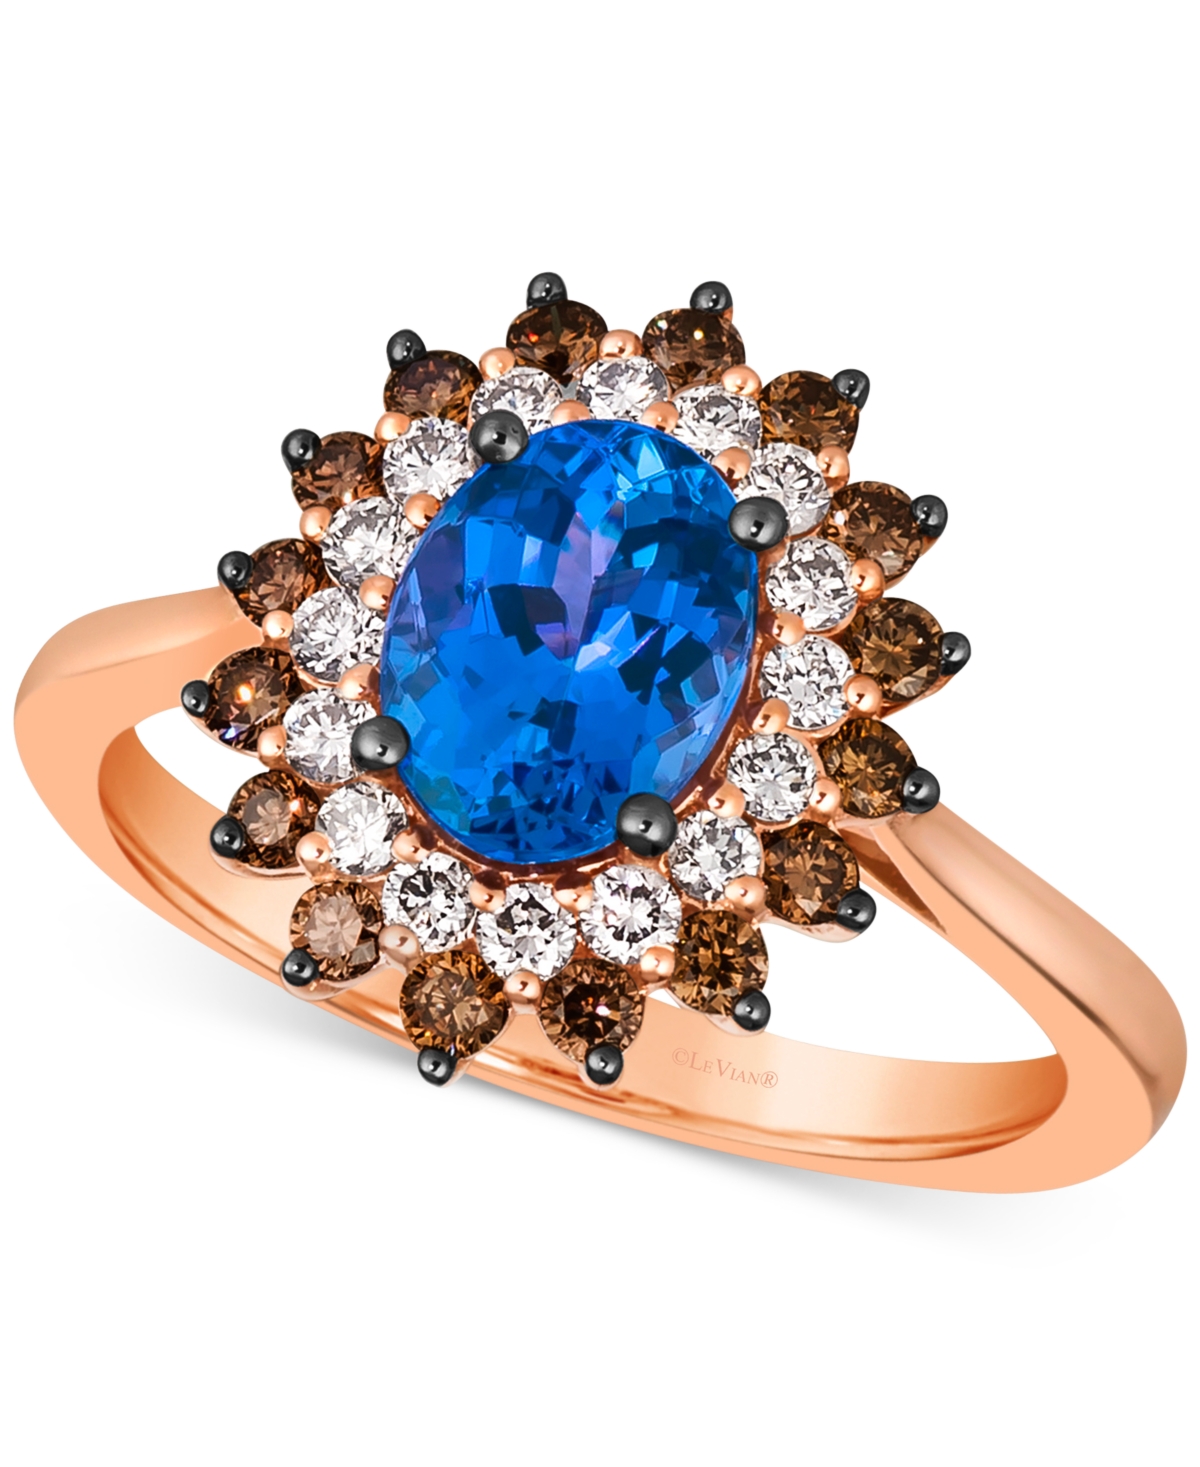 Le Vian Blueberry Tanzanite (1 ct. t.w.), Chocolate Diamonds (1/3 ct. t.w.) & Nude Diamonds (1/4 ct. t.w.) Statement Ring in 14k Rose Gold